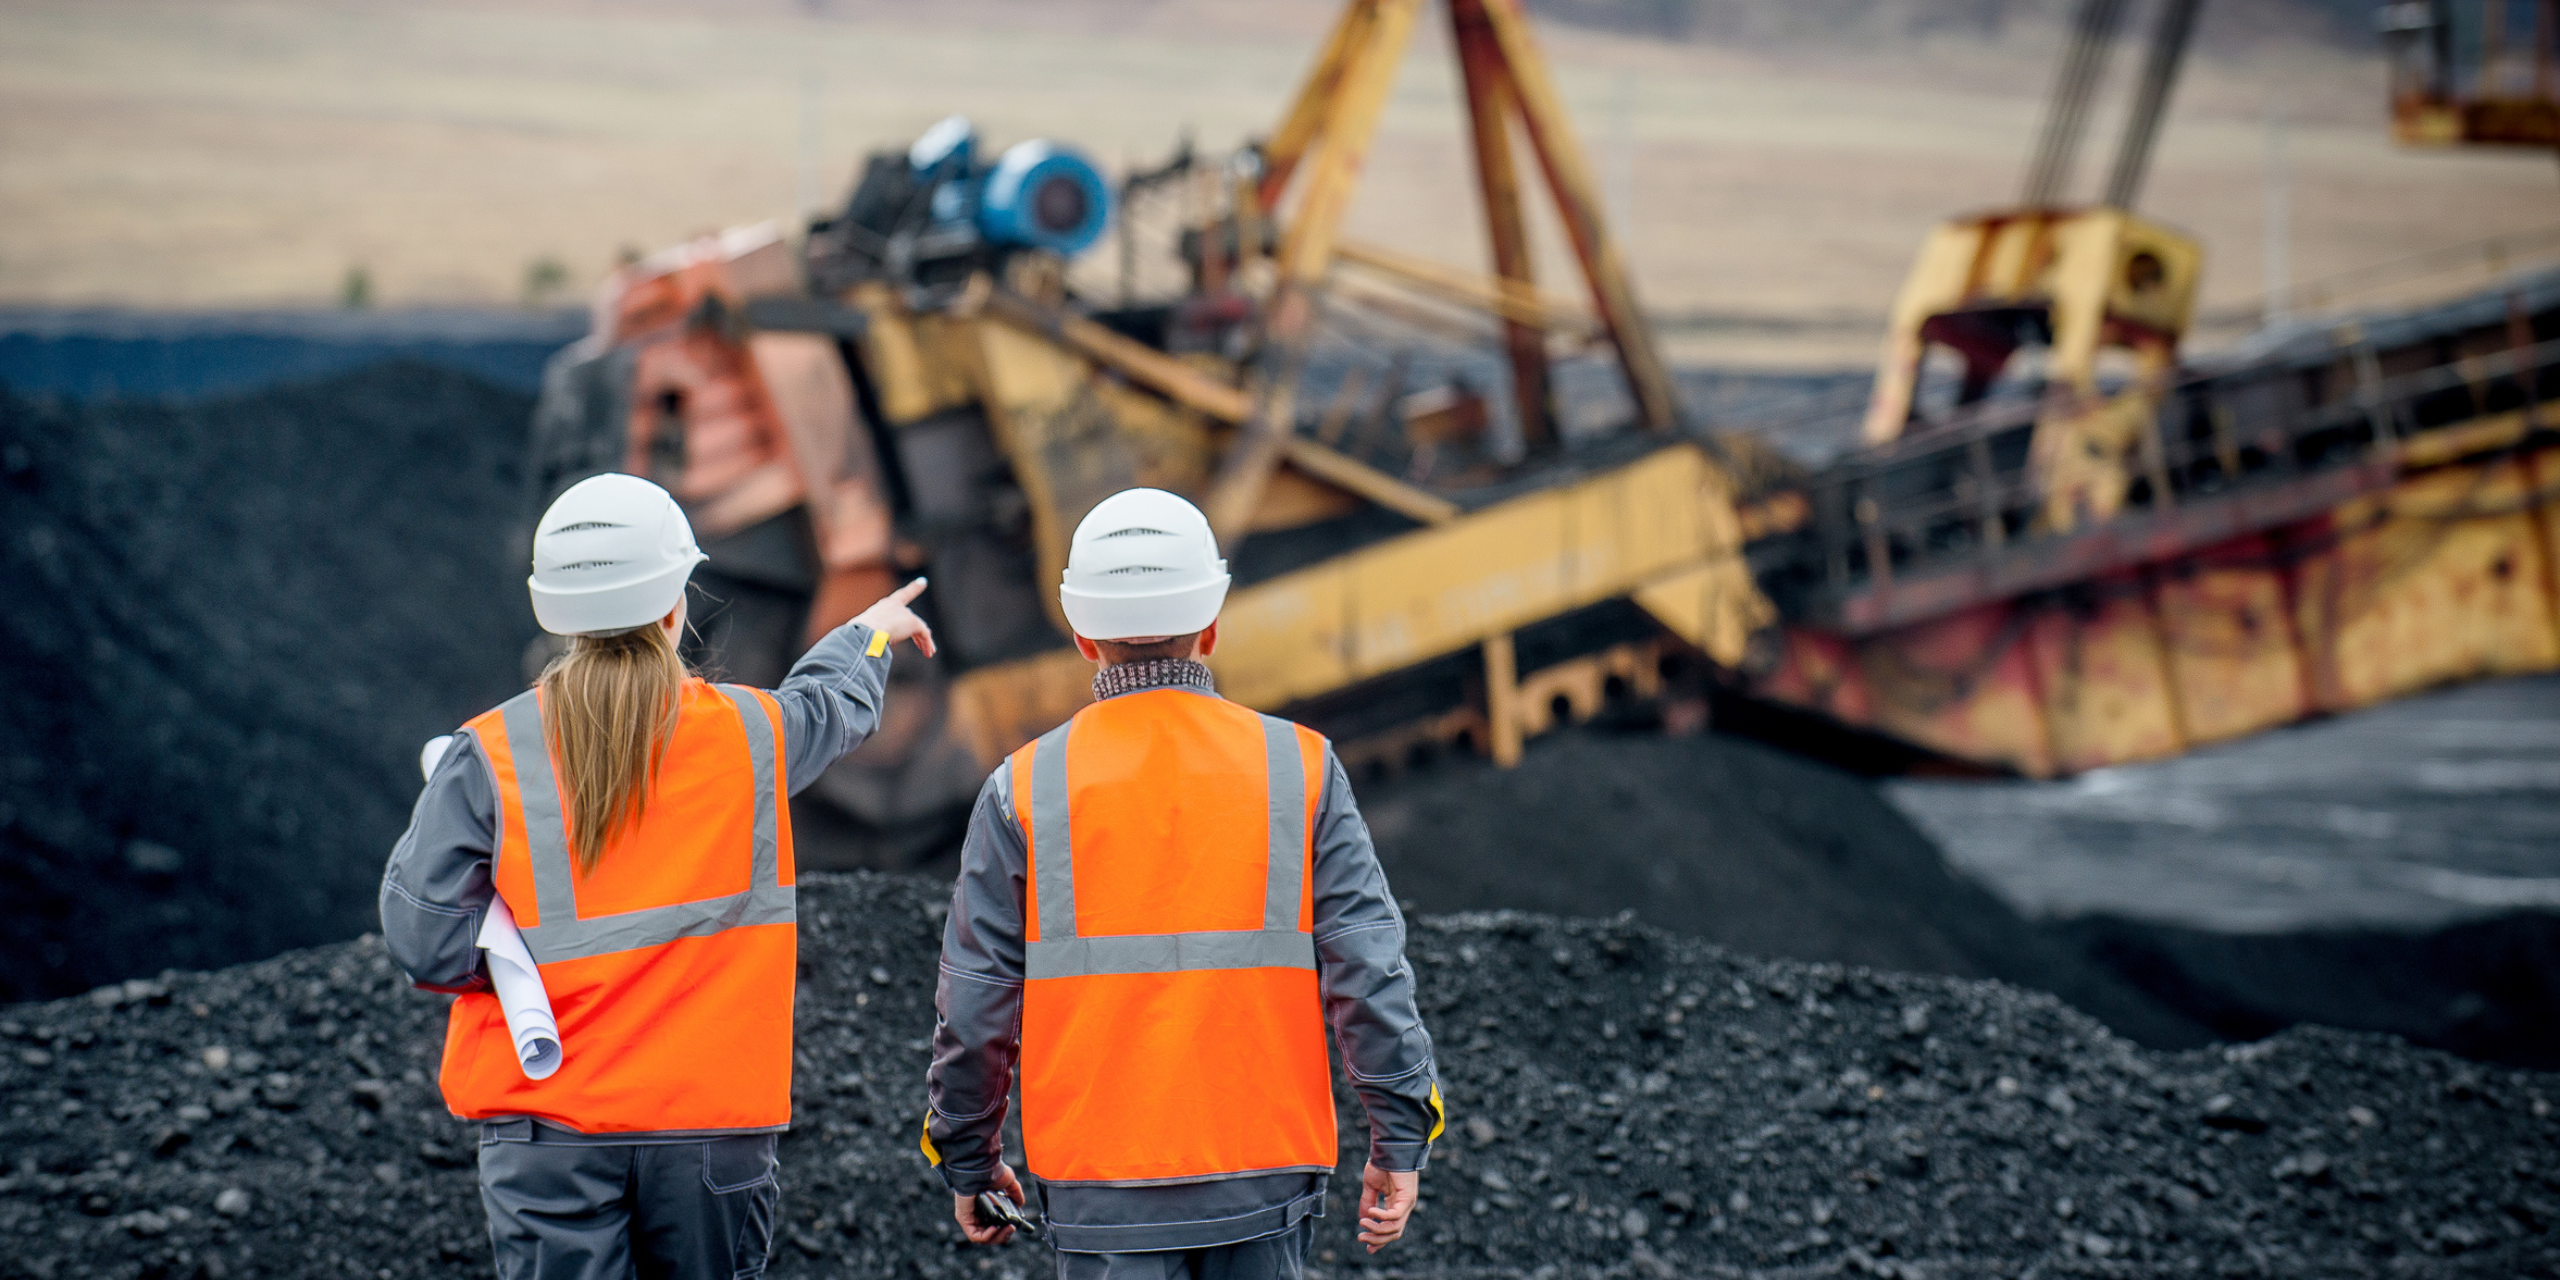 Mining and Finding Better Remote Inspection Results